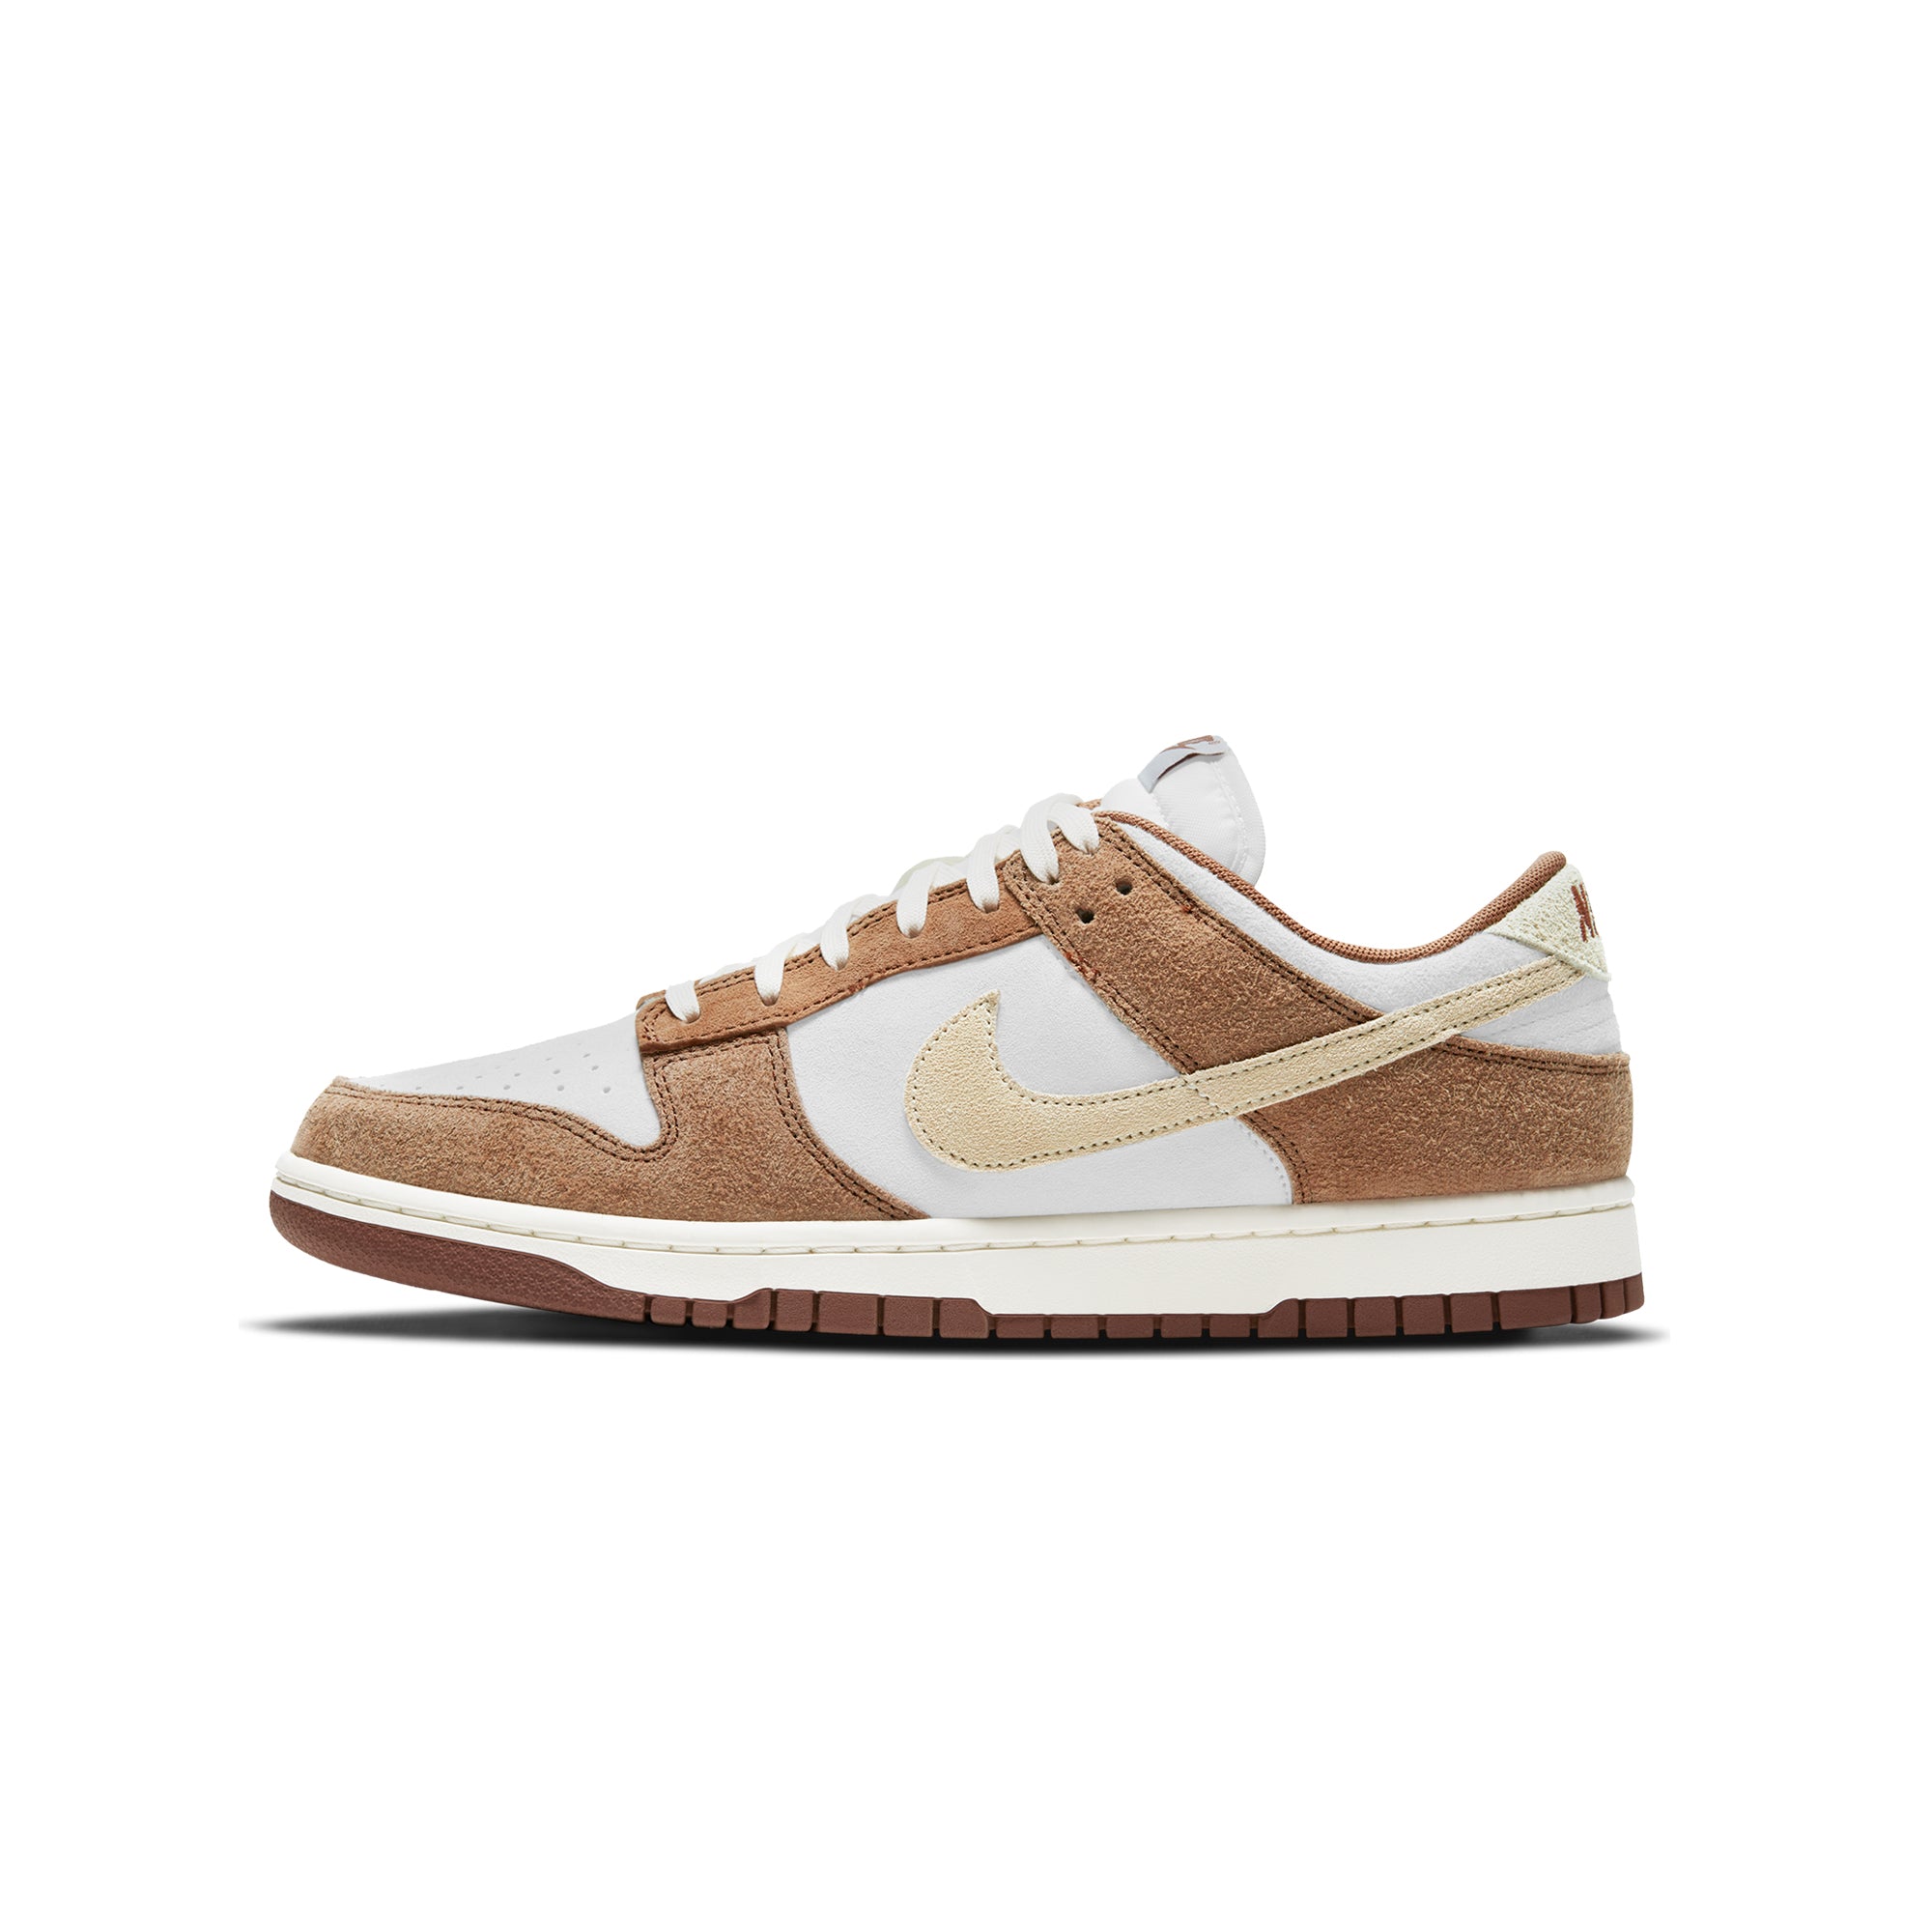 Nike Dunk Low Retro Premium 'Curry' Shoes card image